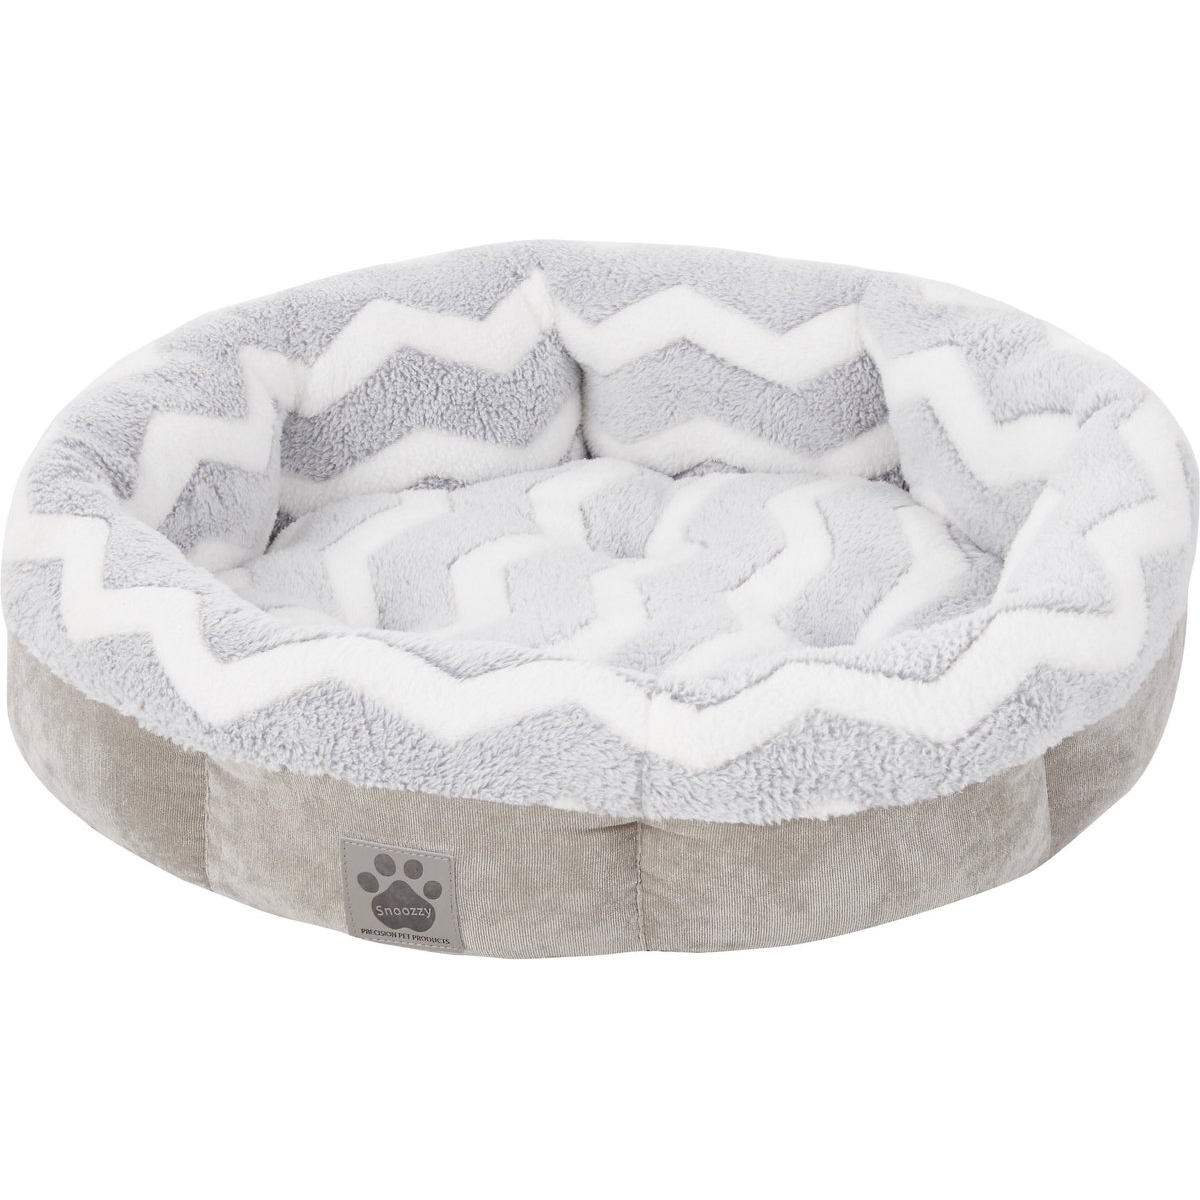 Precision Pet Products SnooZZy Dog Bed